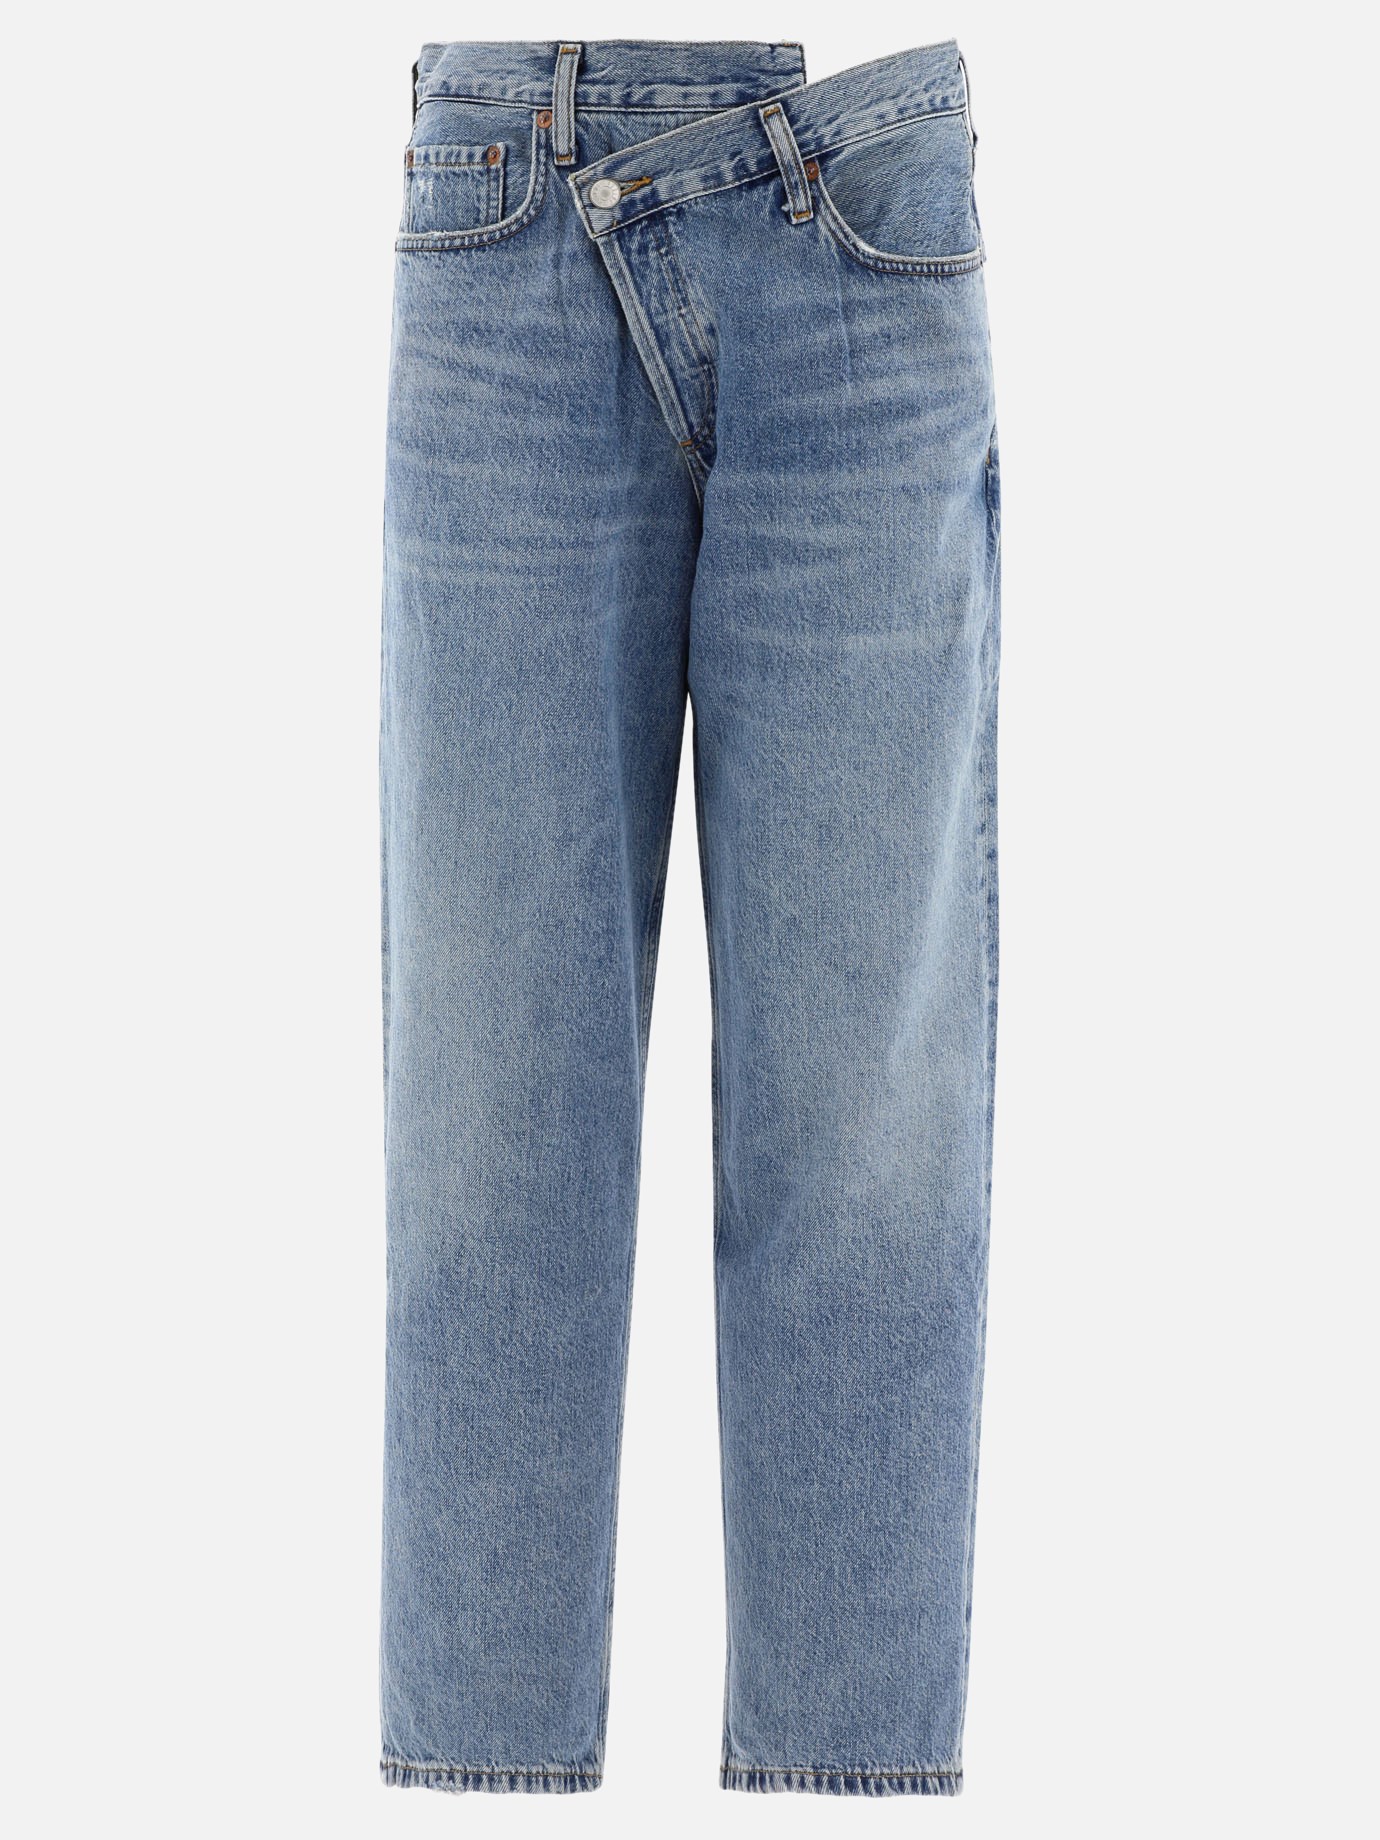 Jeans  Criss Cross by Agolde - 3